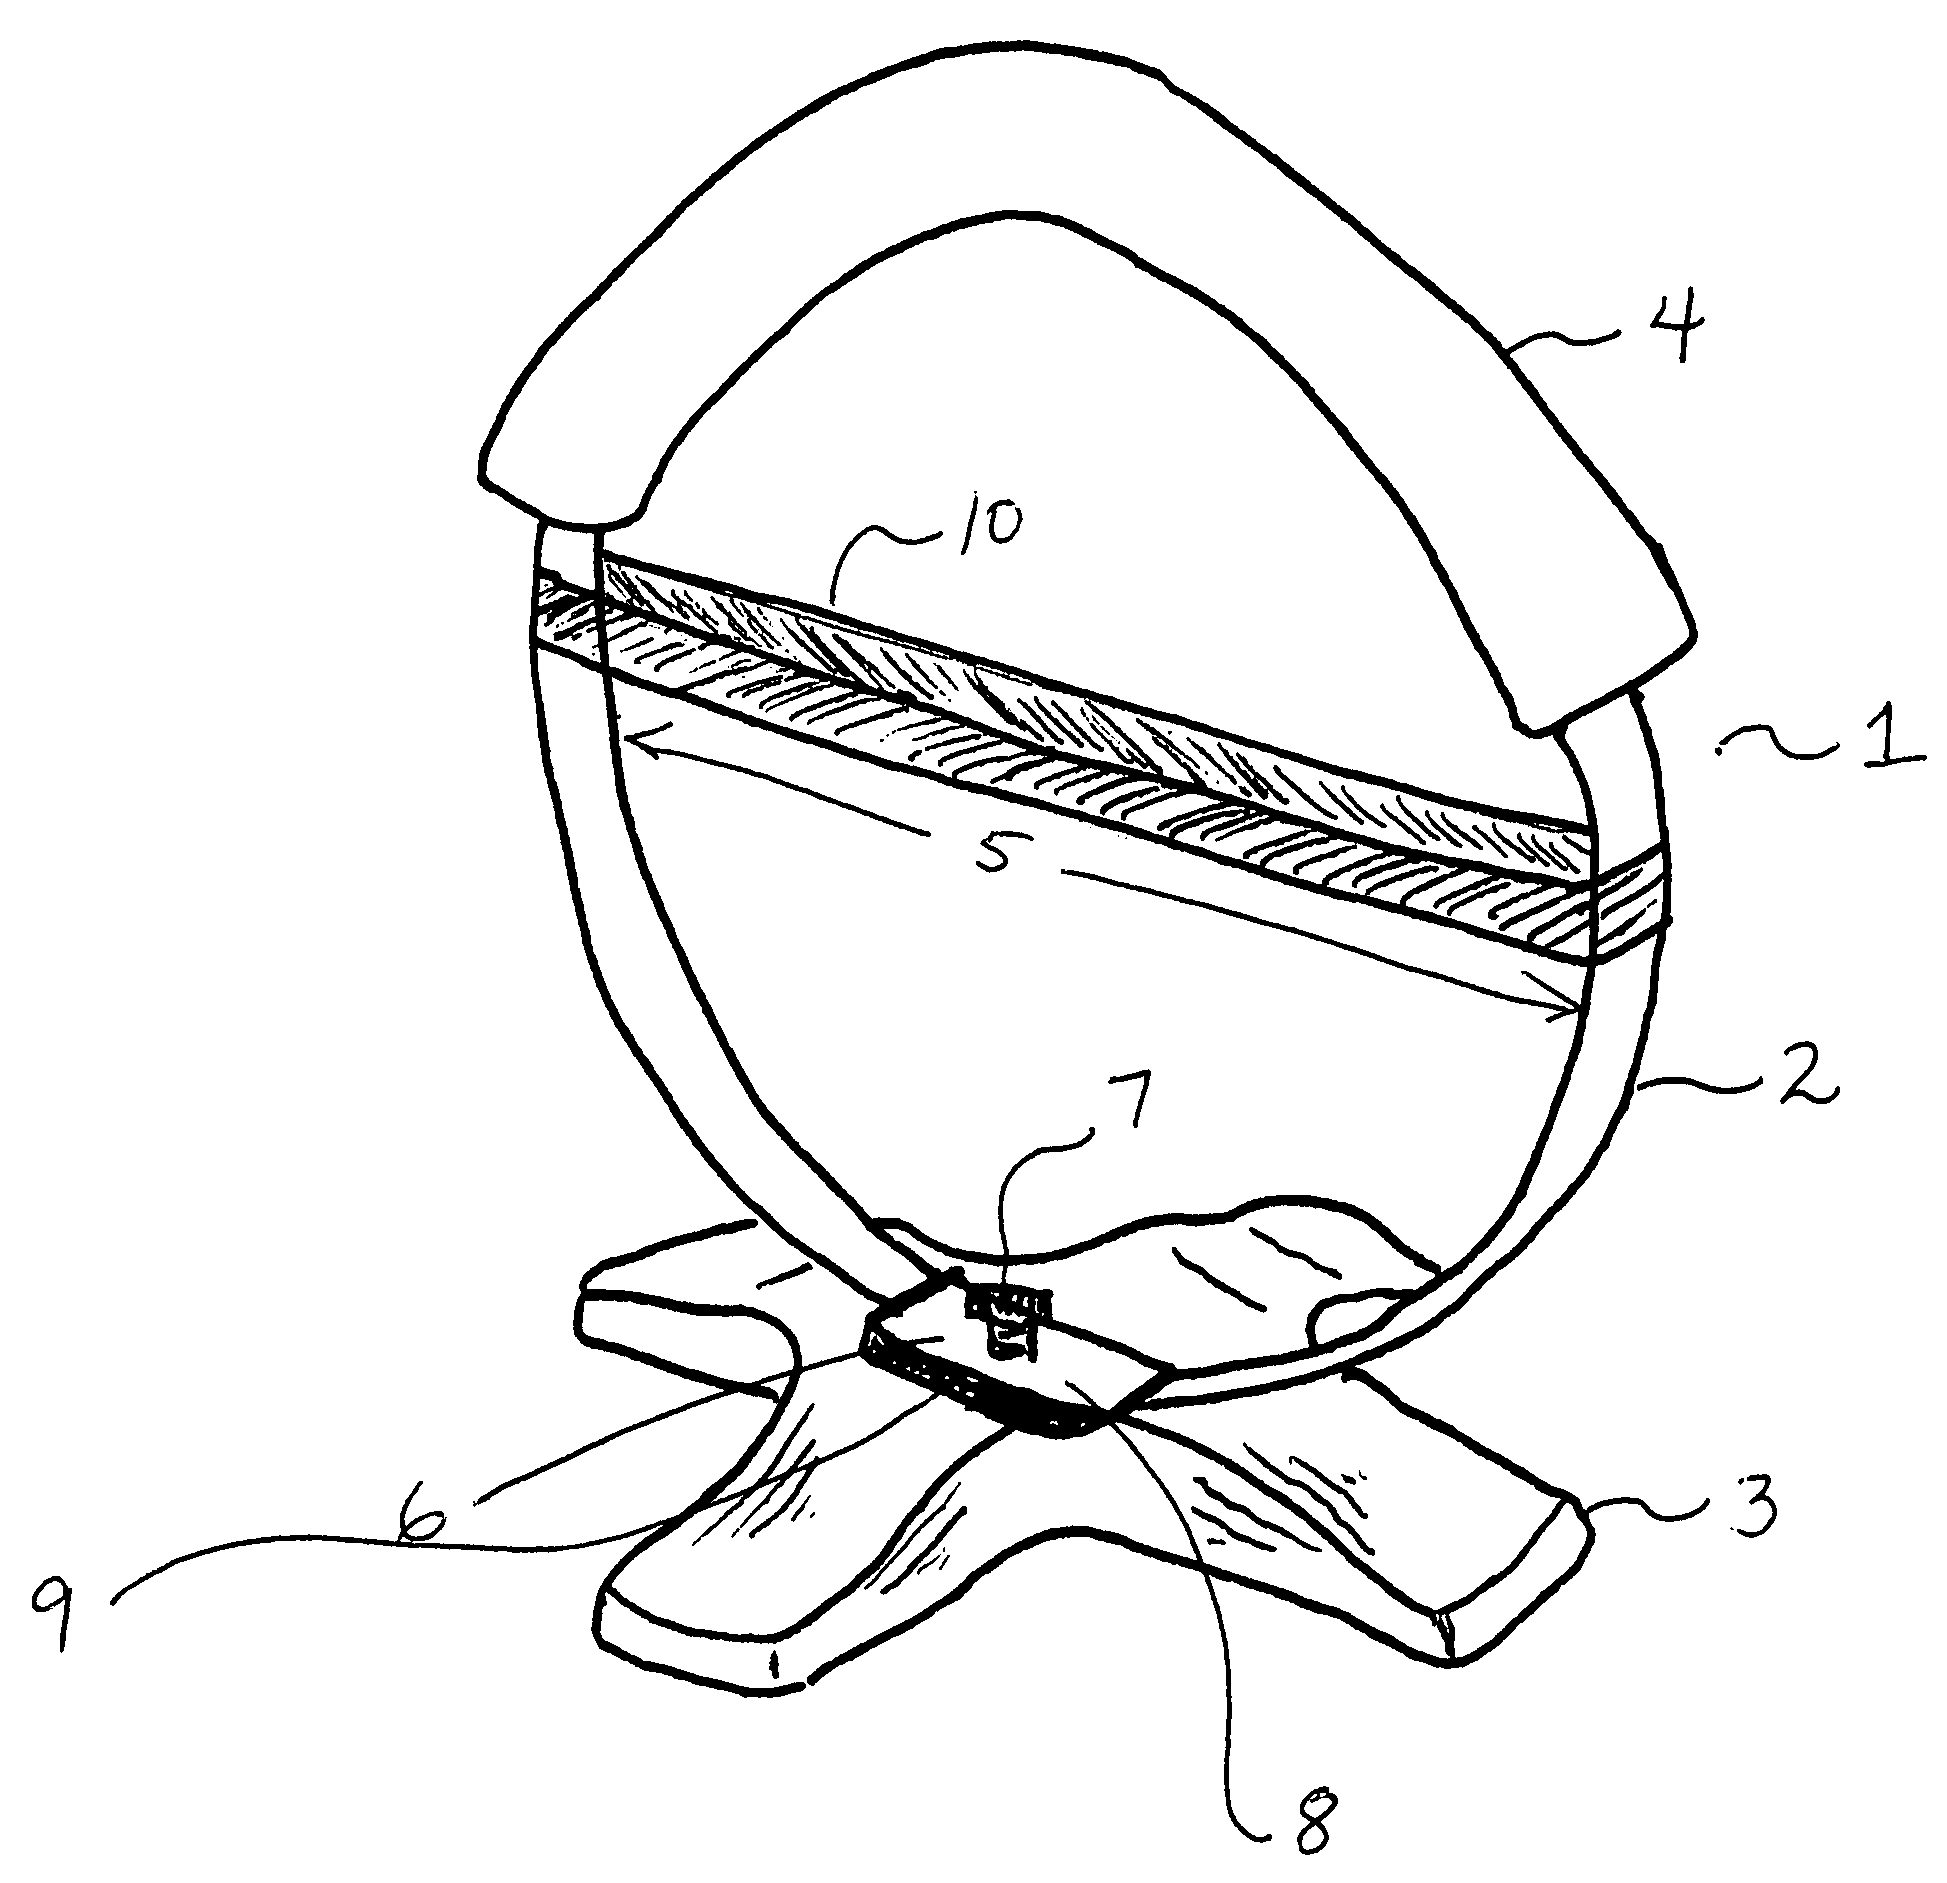 Push up/pull up exercise apparatus and methods for use